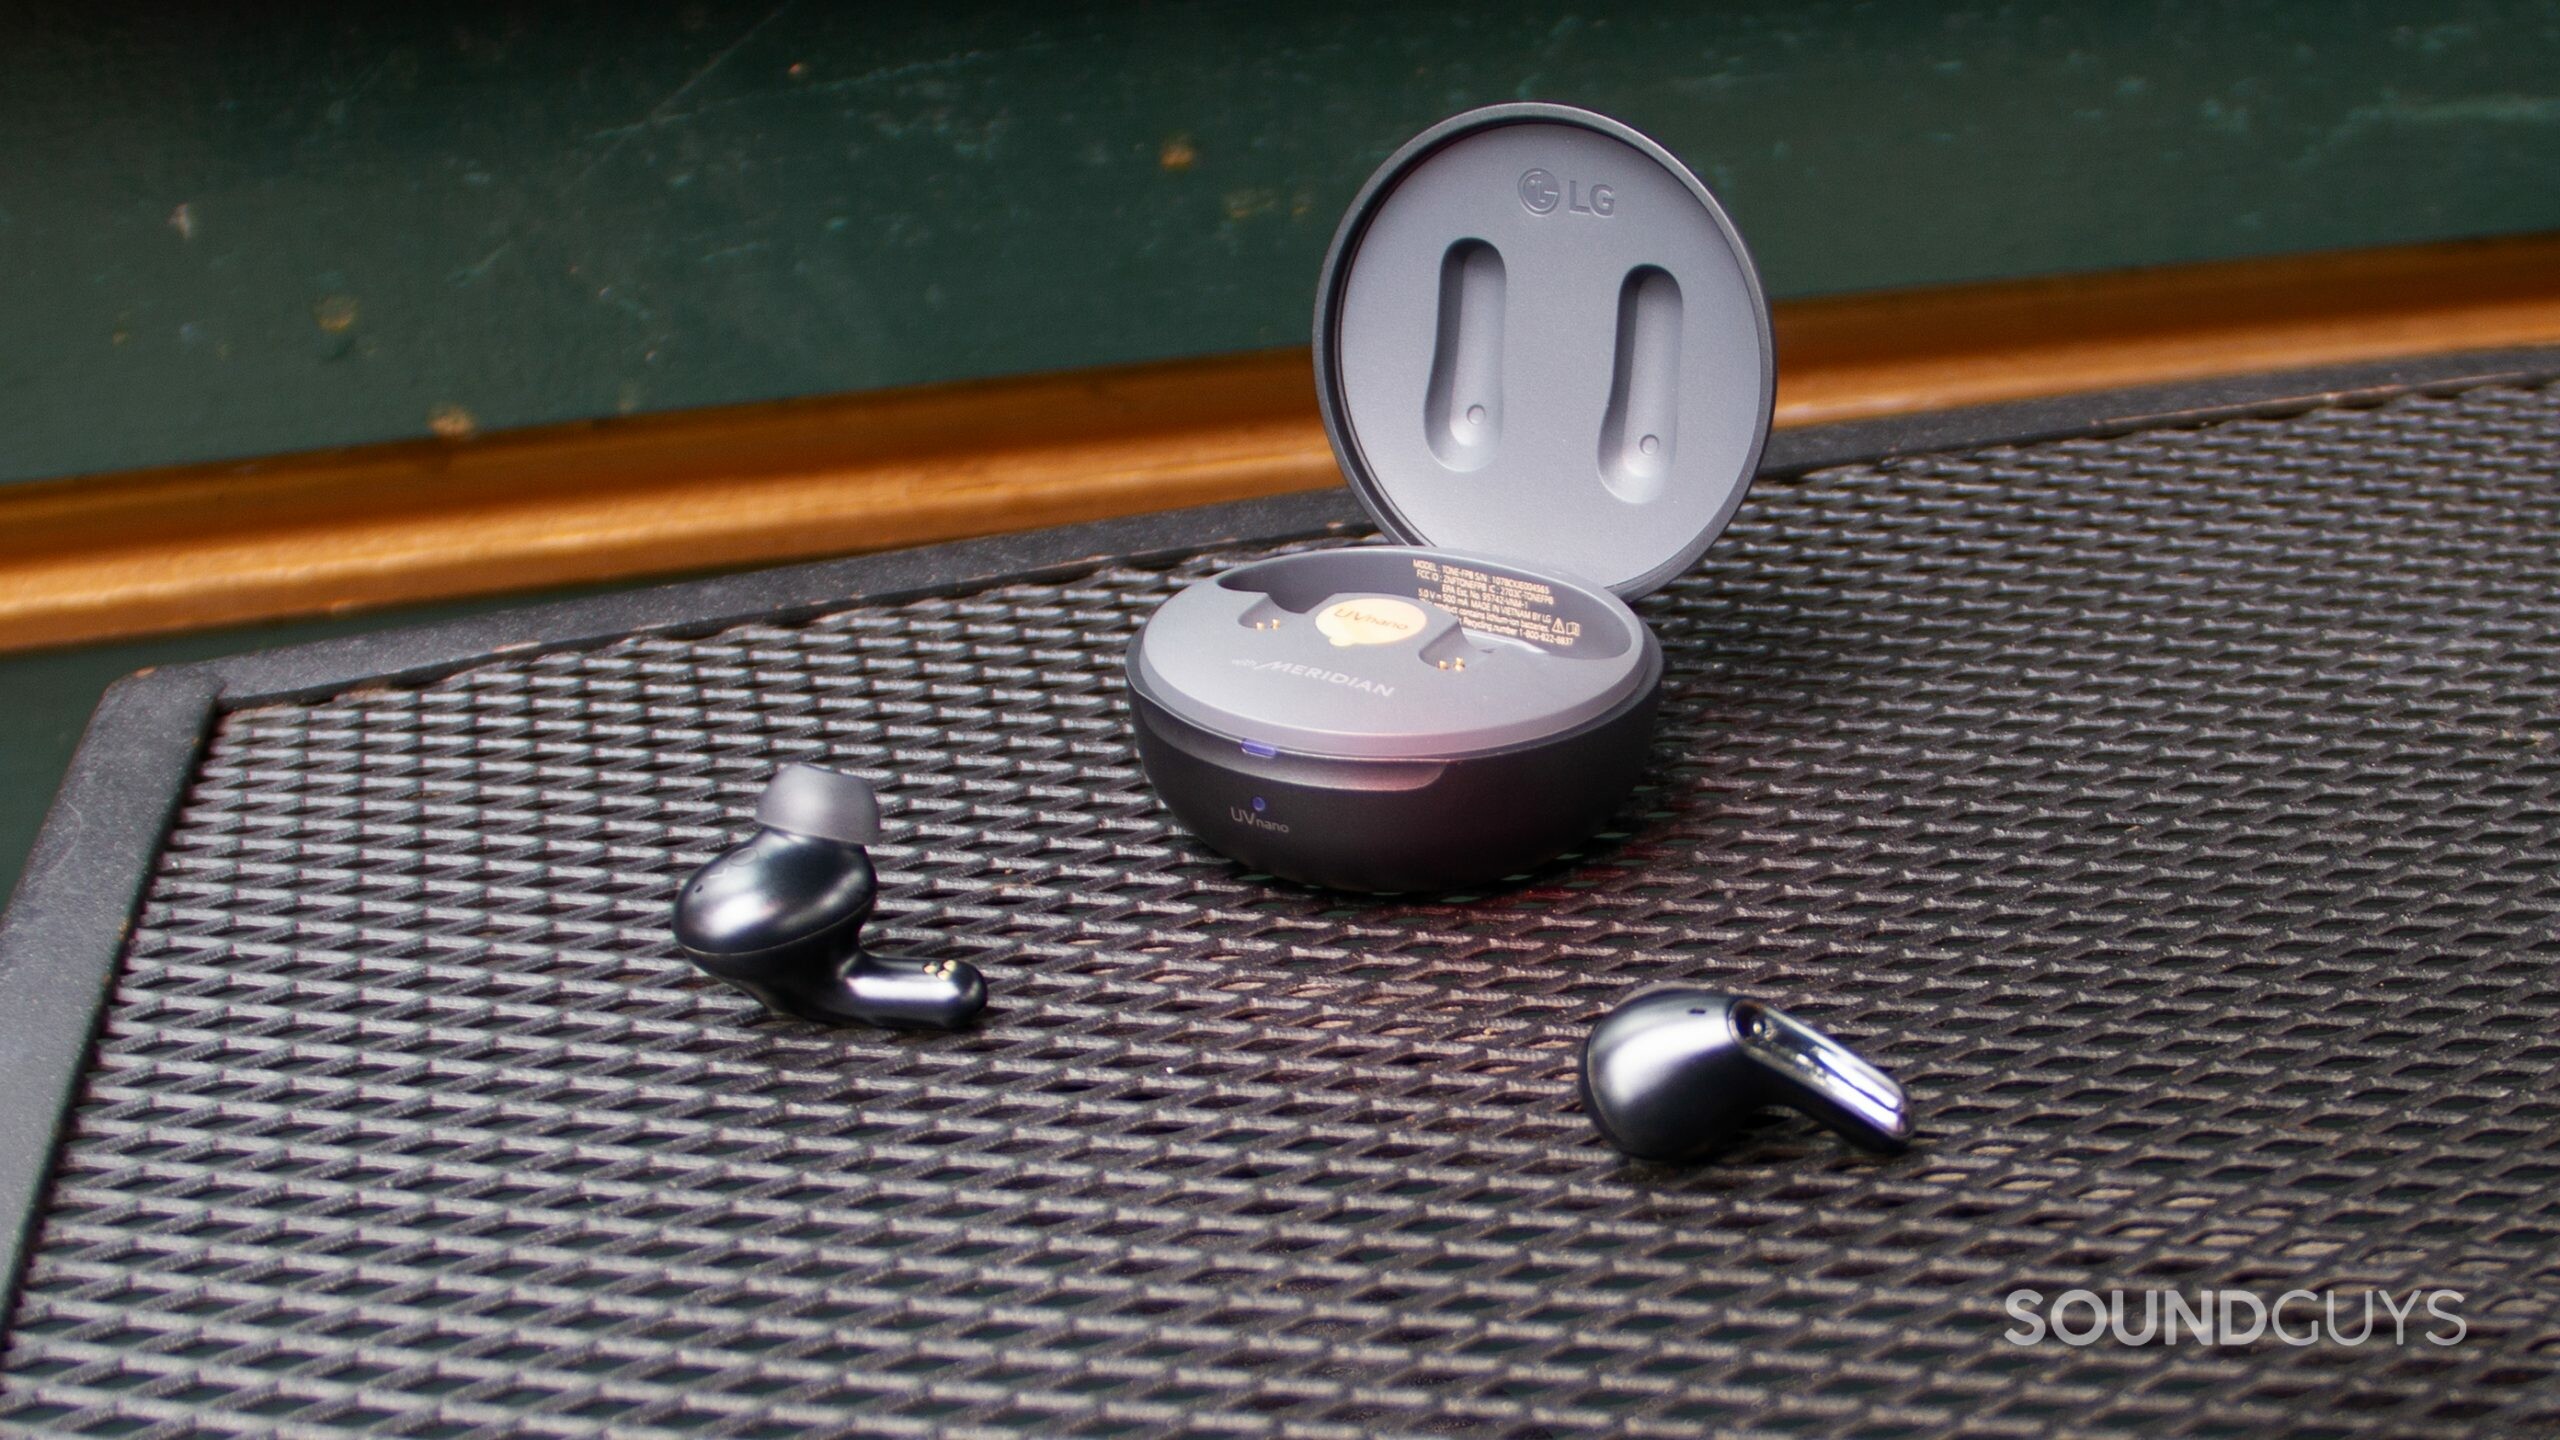 The open case of the LG TONE Free FP8 on a metal grated table outside with the buds placed on the table.